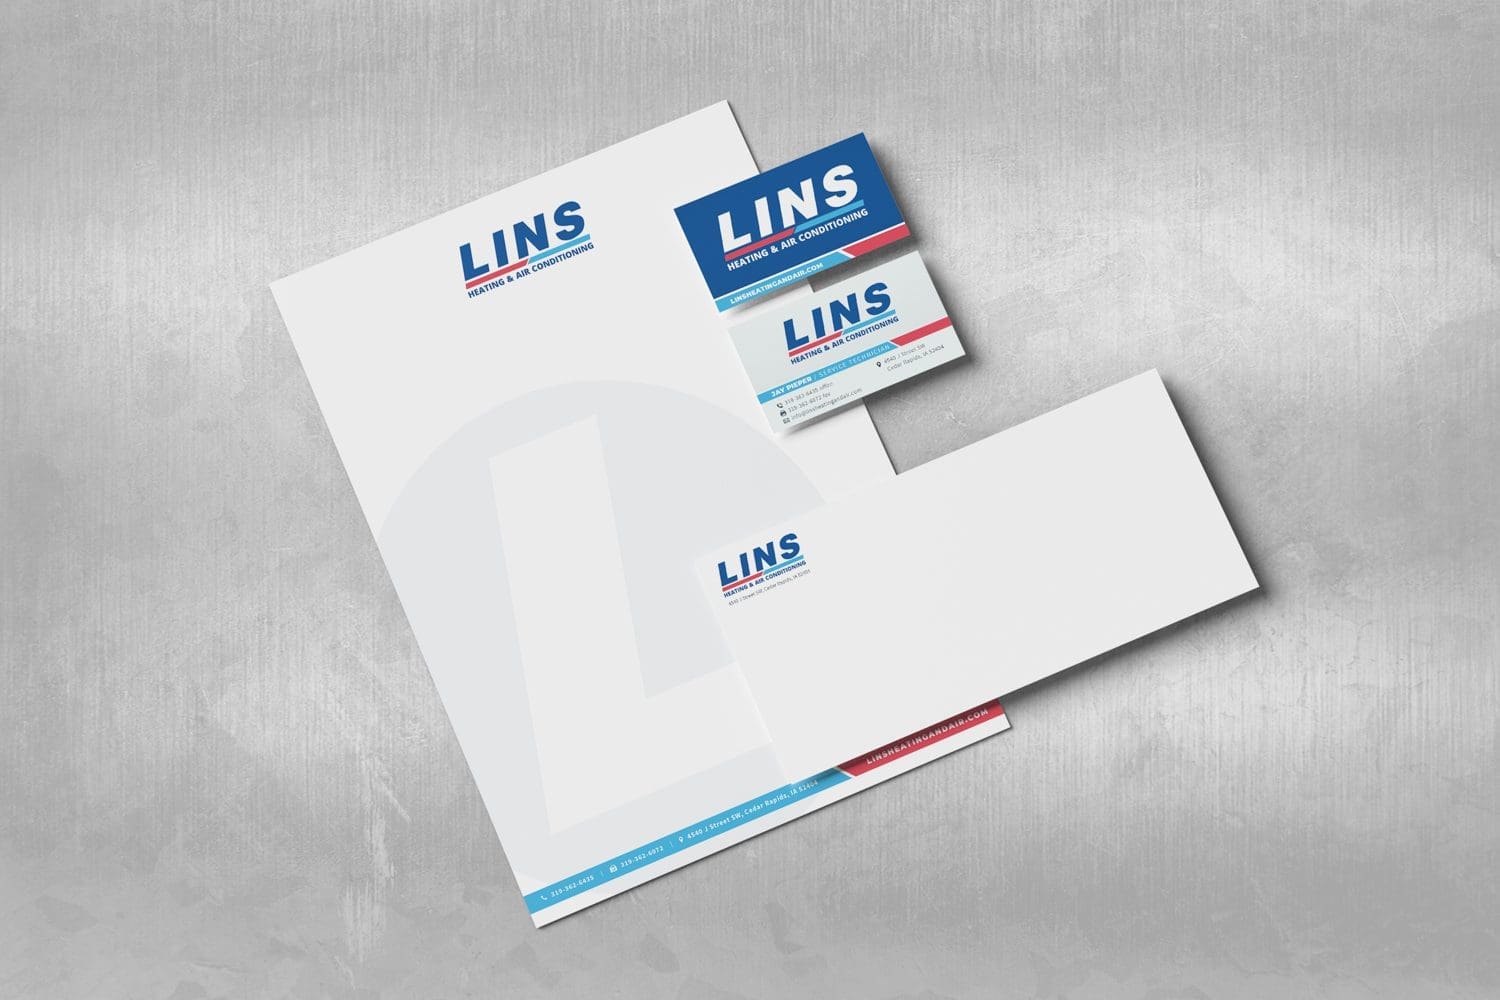 LINS Heating & Air Conditioning letterhead envelopes and business cards sig pack